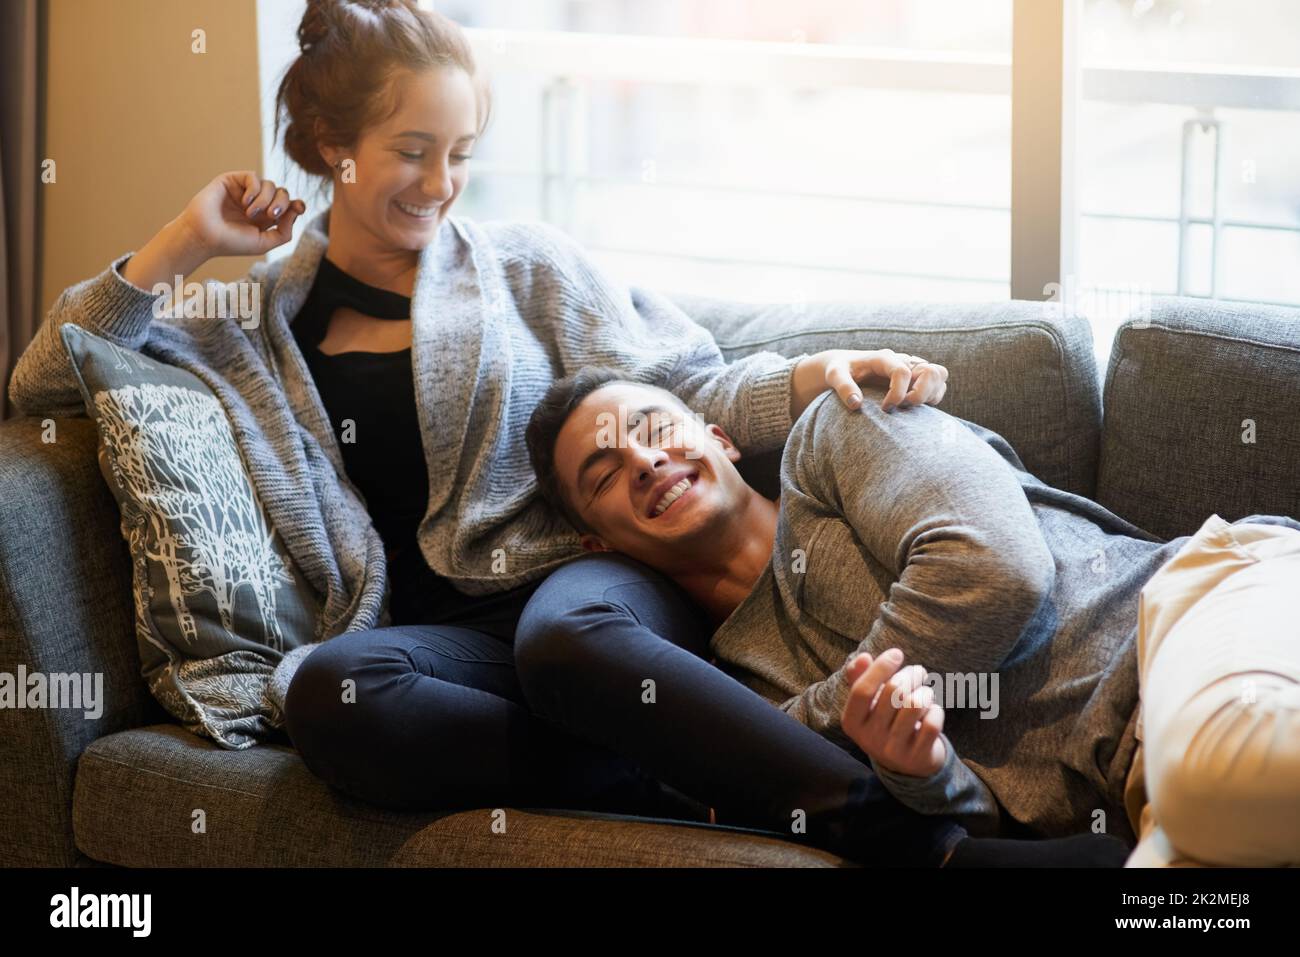 The lap of love. Portrait of a handsome young man lying on his girlfriends lap on the sofa. Stock Photo